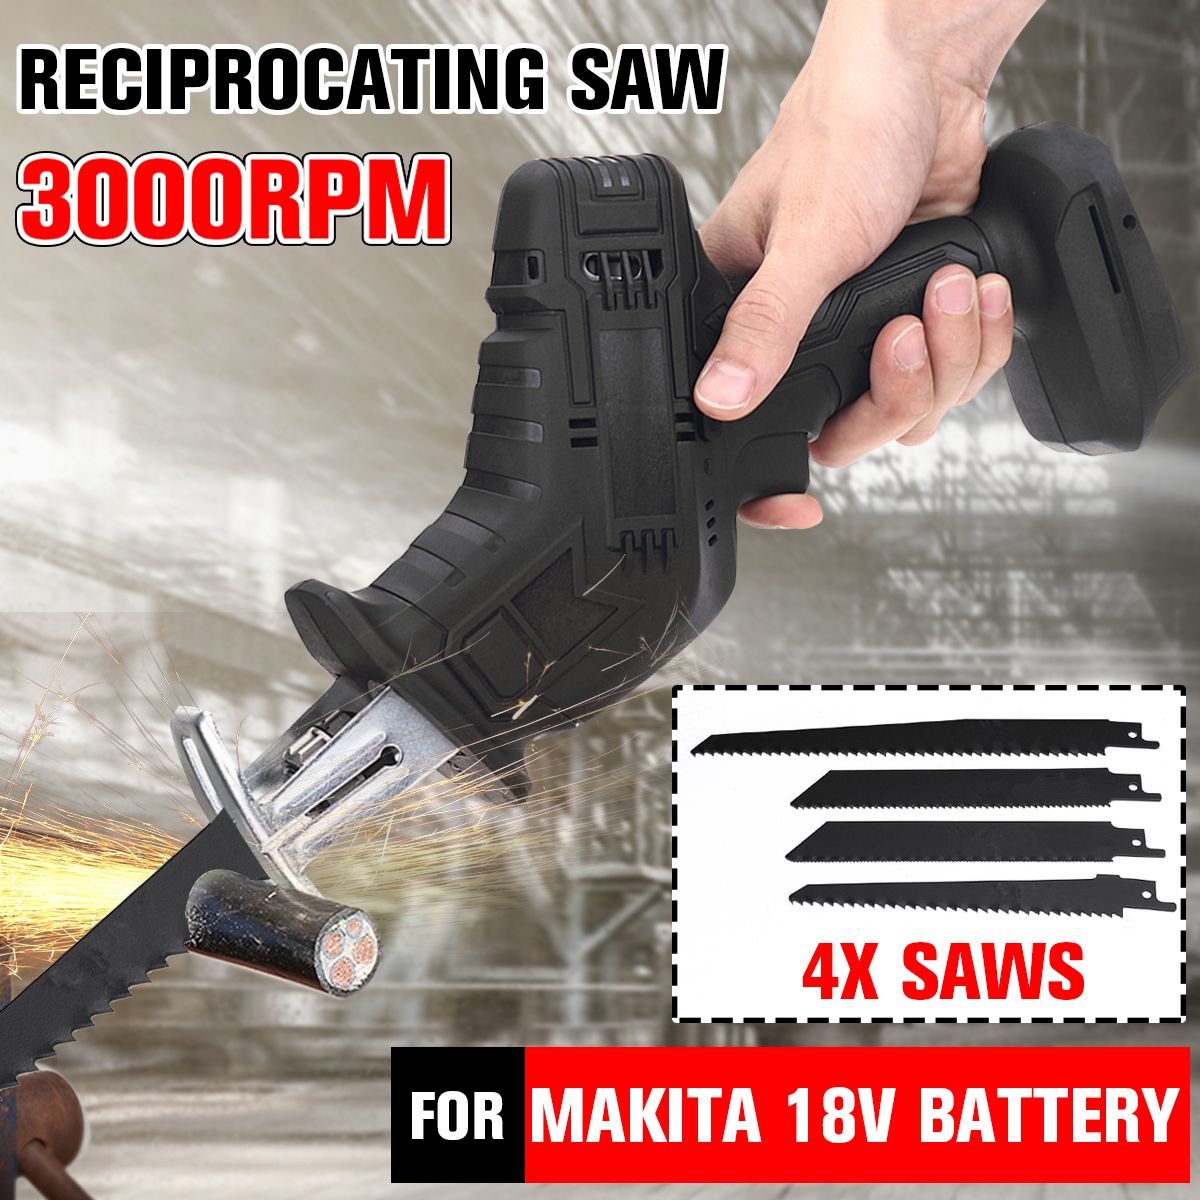 0-3000rpmmin-Variable-Speed-Reciprocating-Saw-Electric-Brake-Saws-With-4-Blads-Adapted-To-18V-Makita-1709460